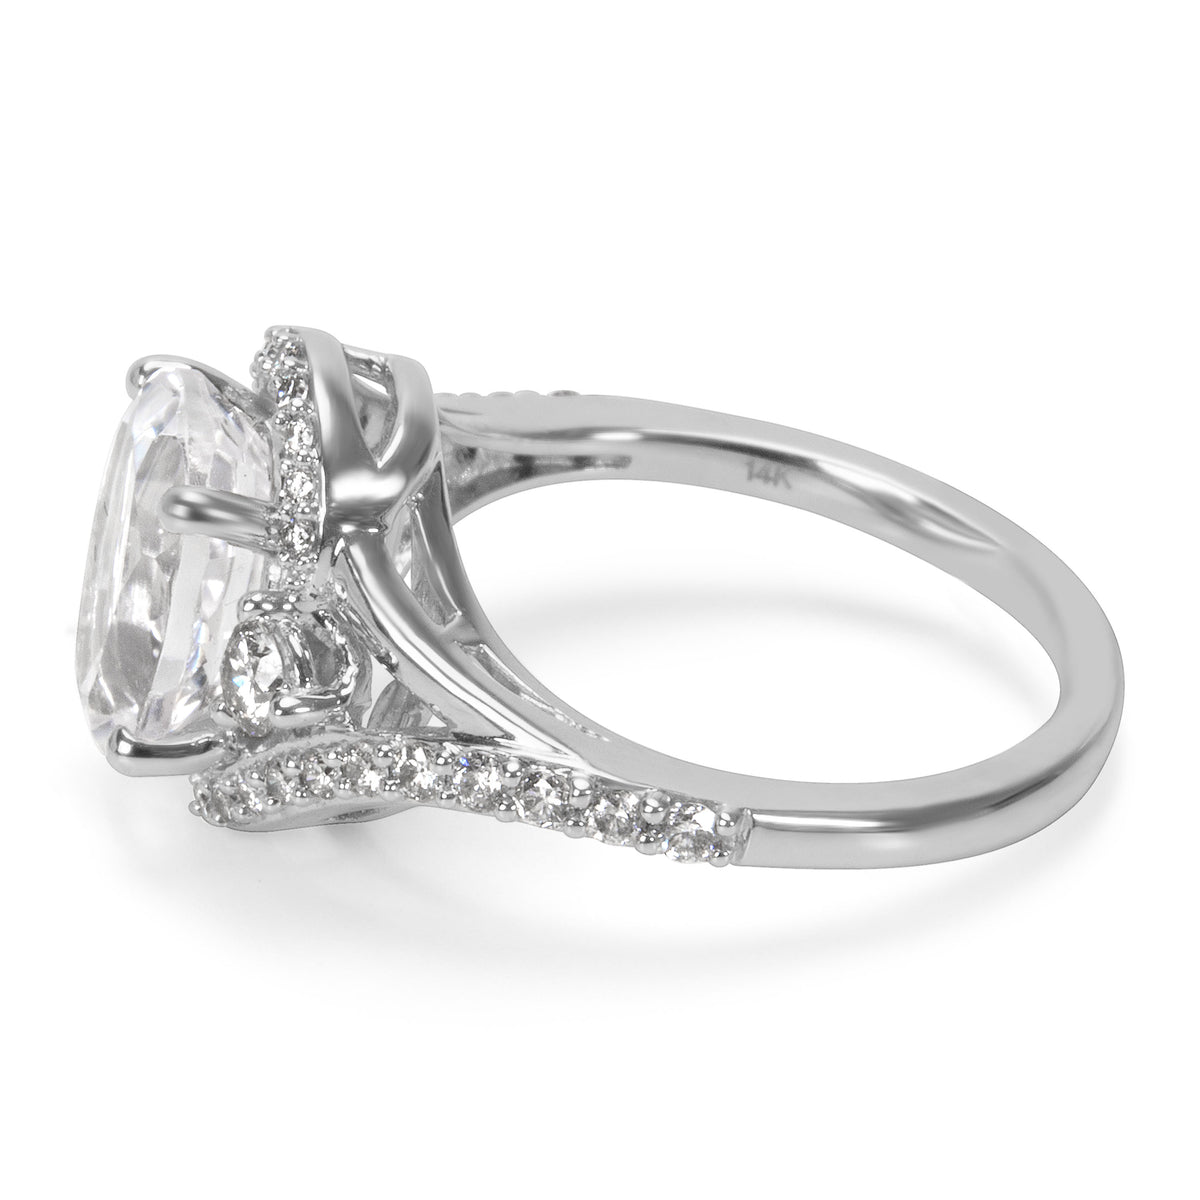 BRAND NEW Engagement Ring in 14K White Gold (0.50 CTW)